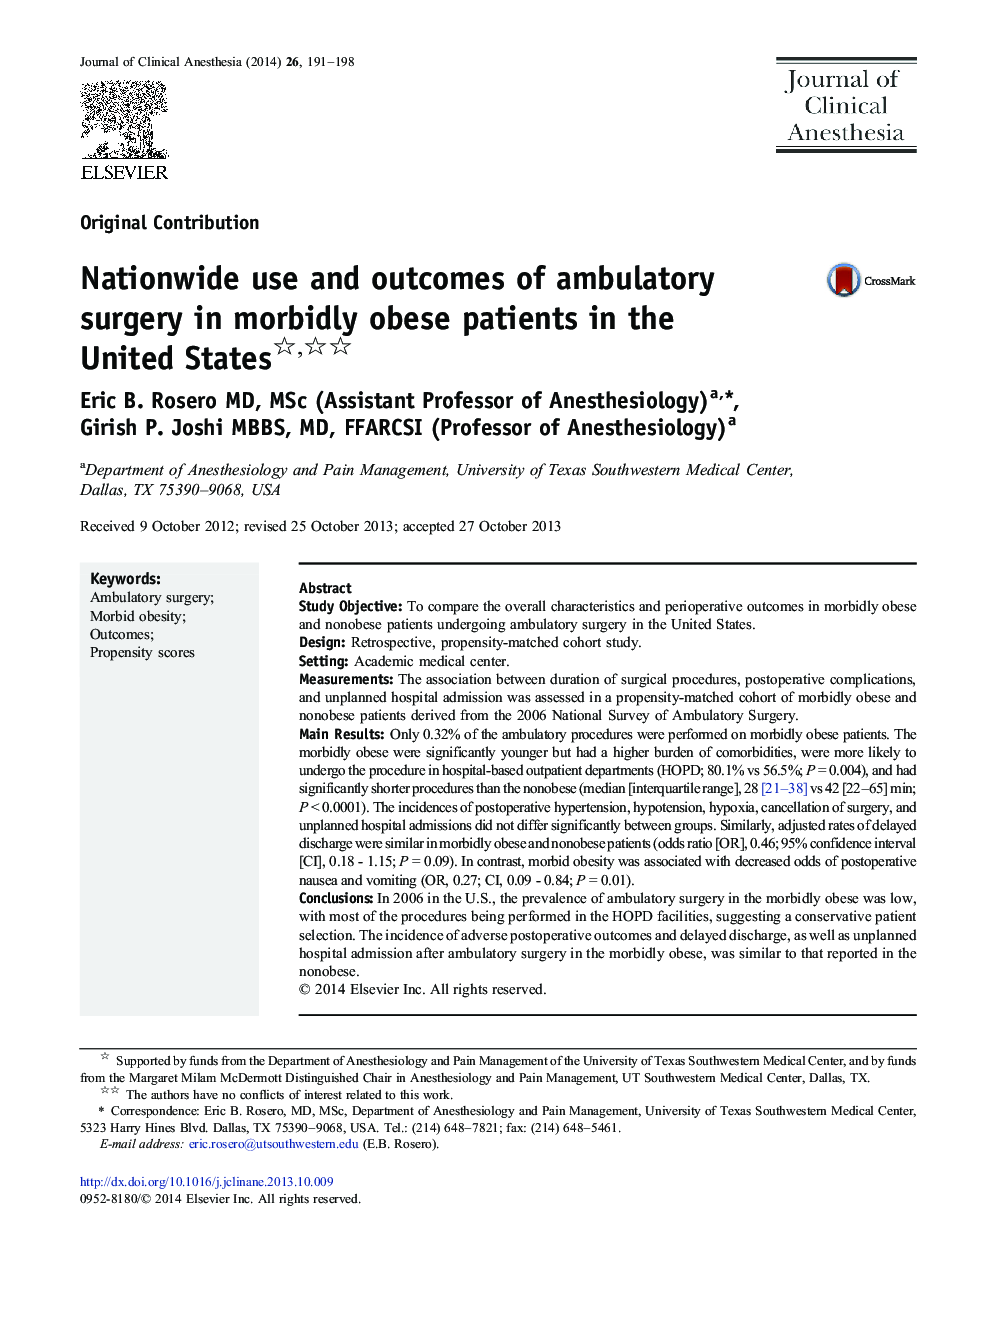 Nationwide use and outcomes of ambulatory surgery in morbidly obese patients in the United States 